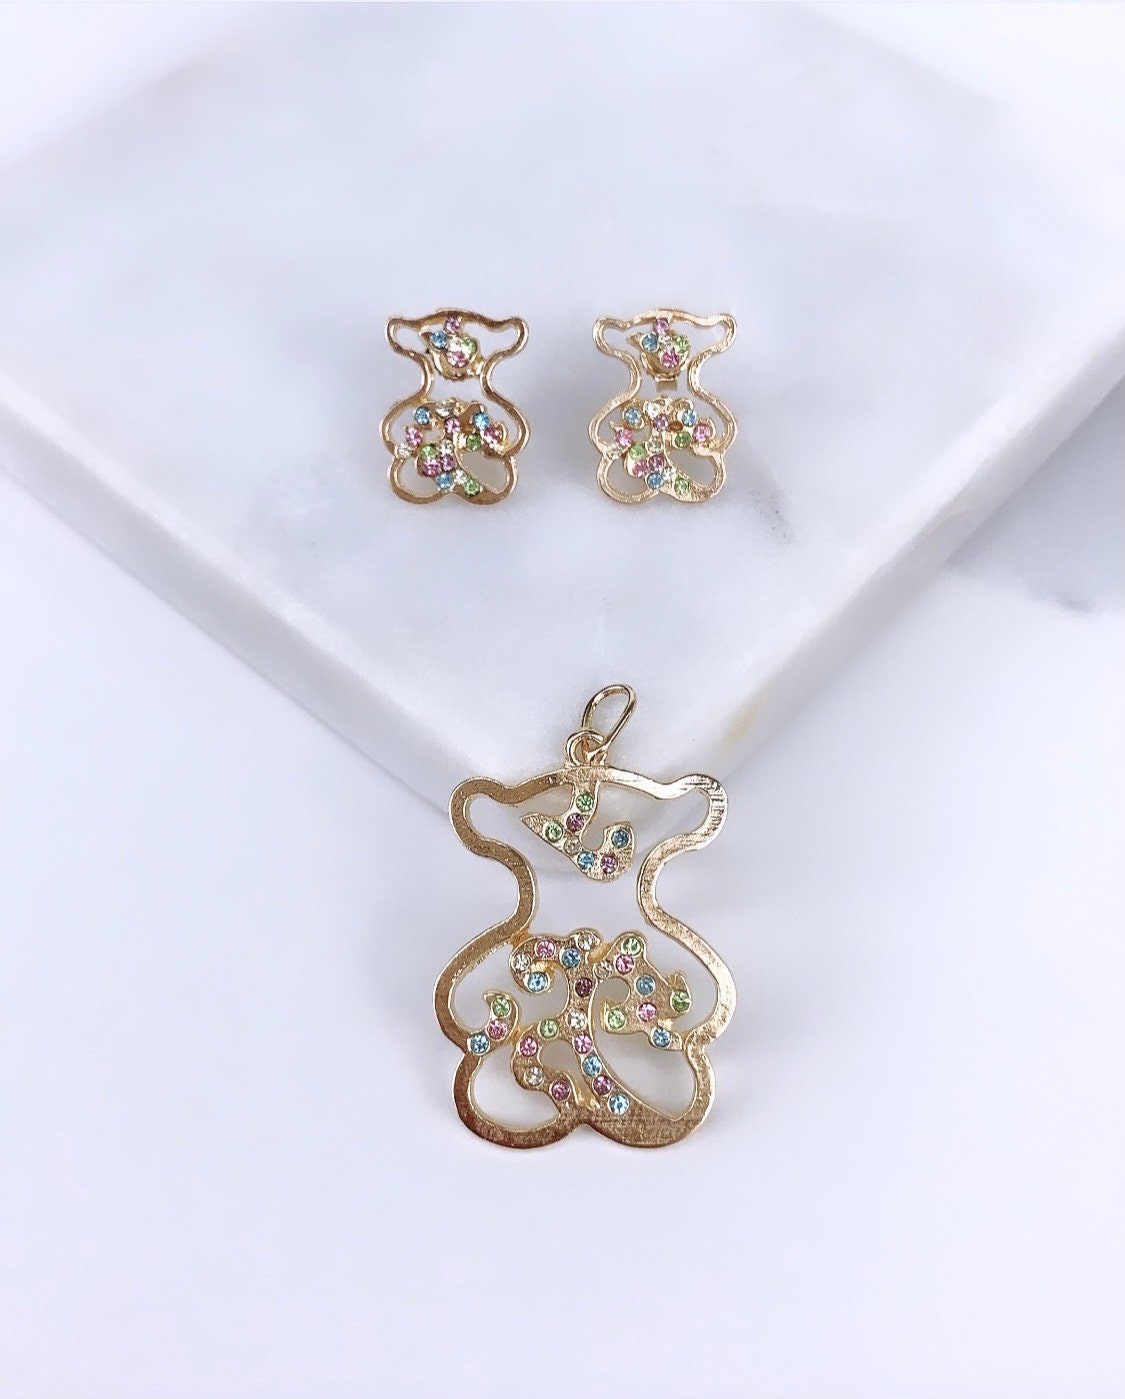 18k Gold Filled with Cubic Zirconia Bear Set of Earrings and Pendant Wholesale Jewelry Supplies